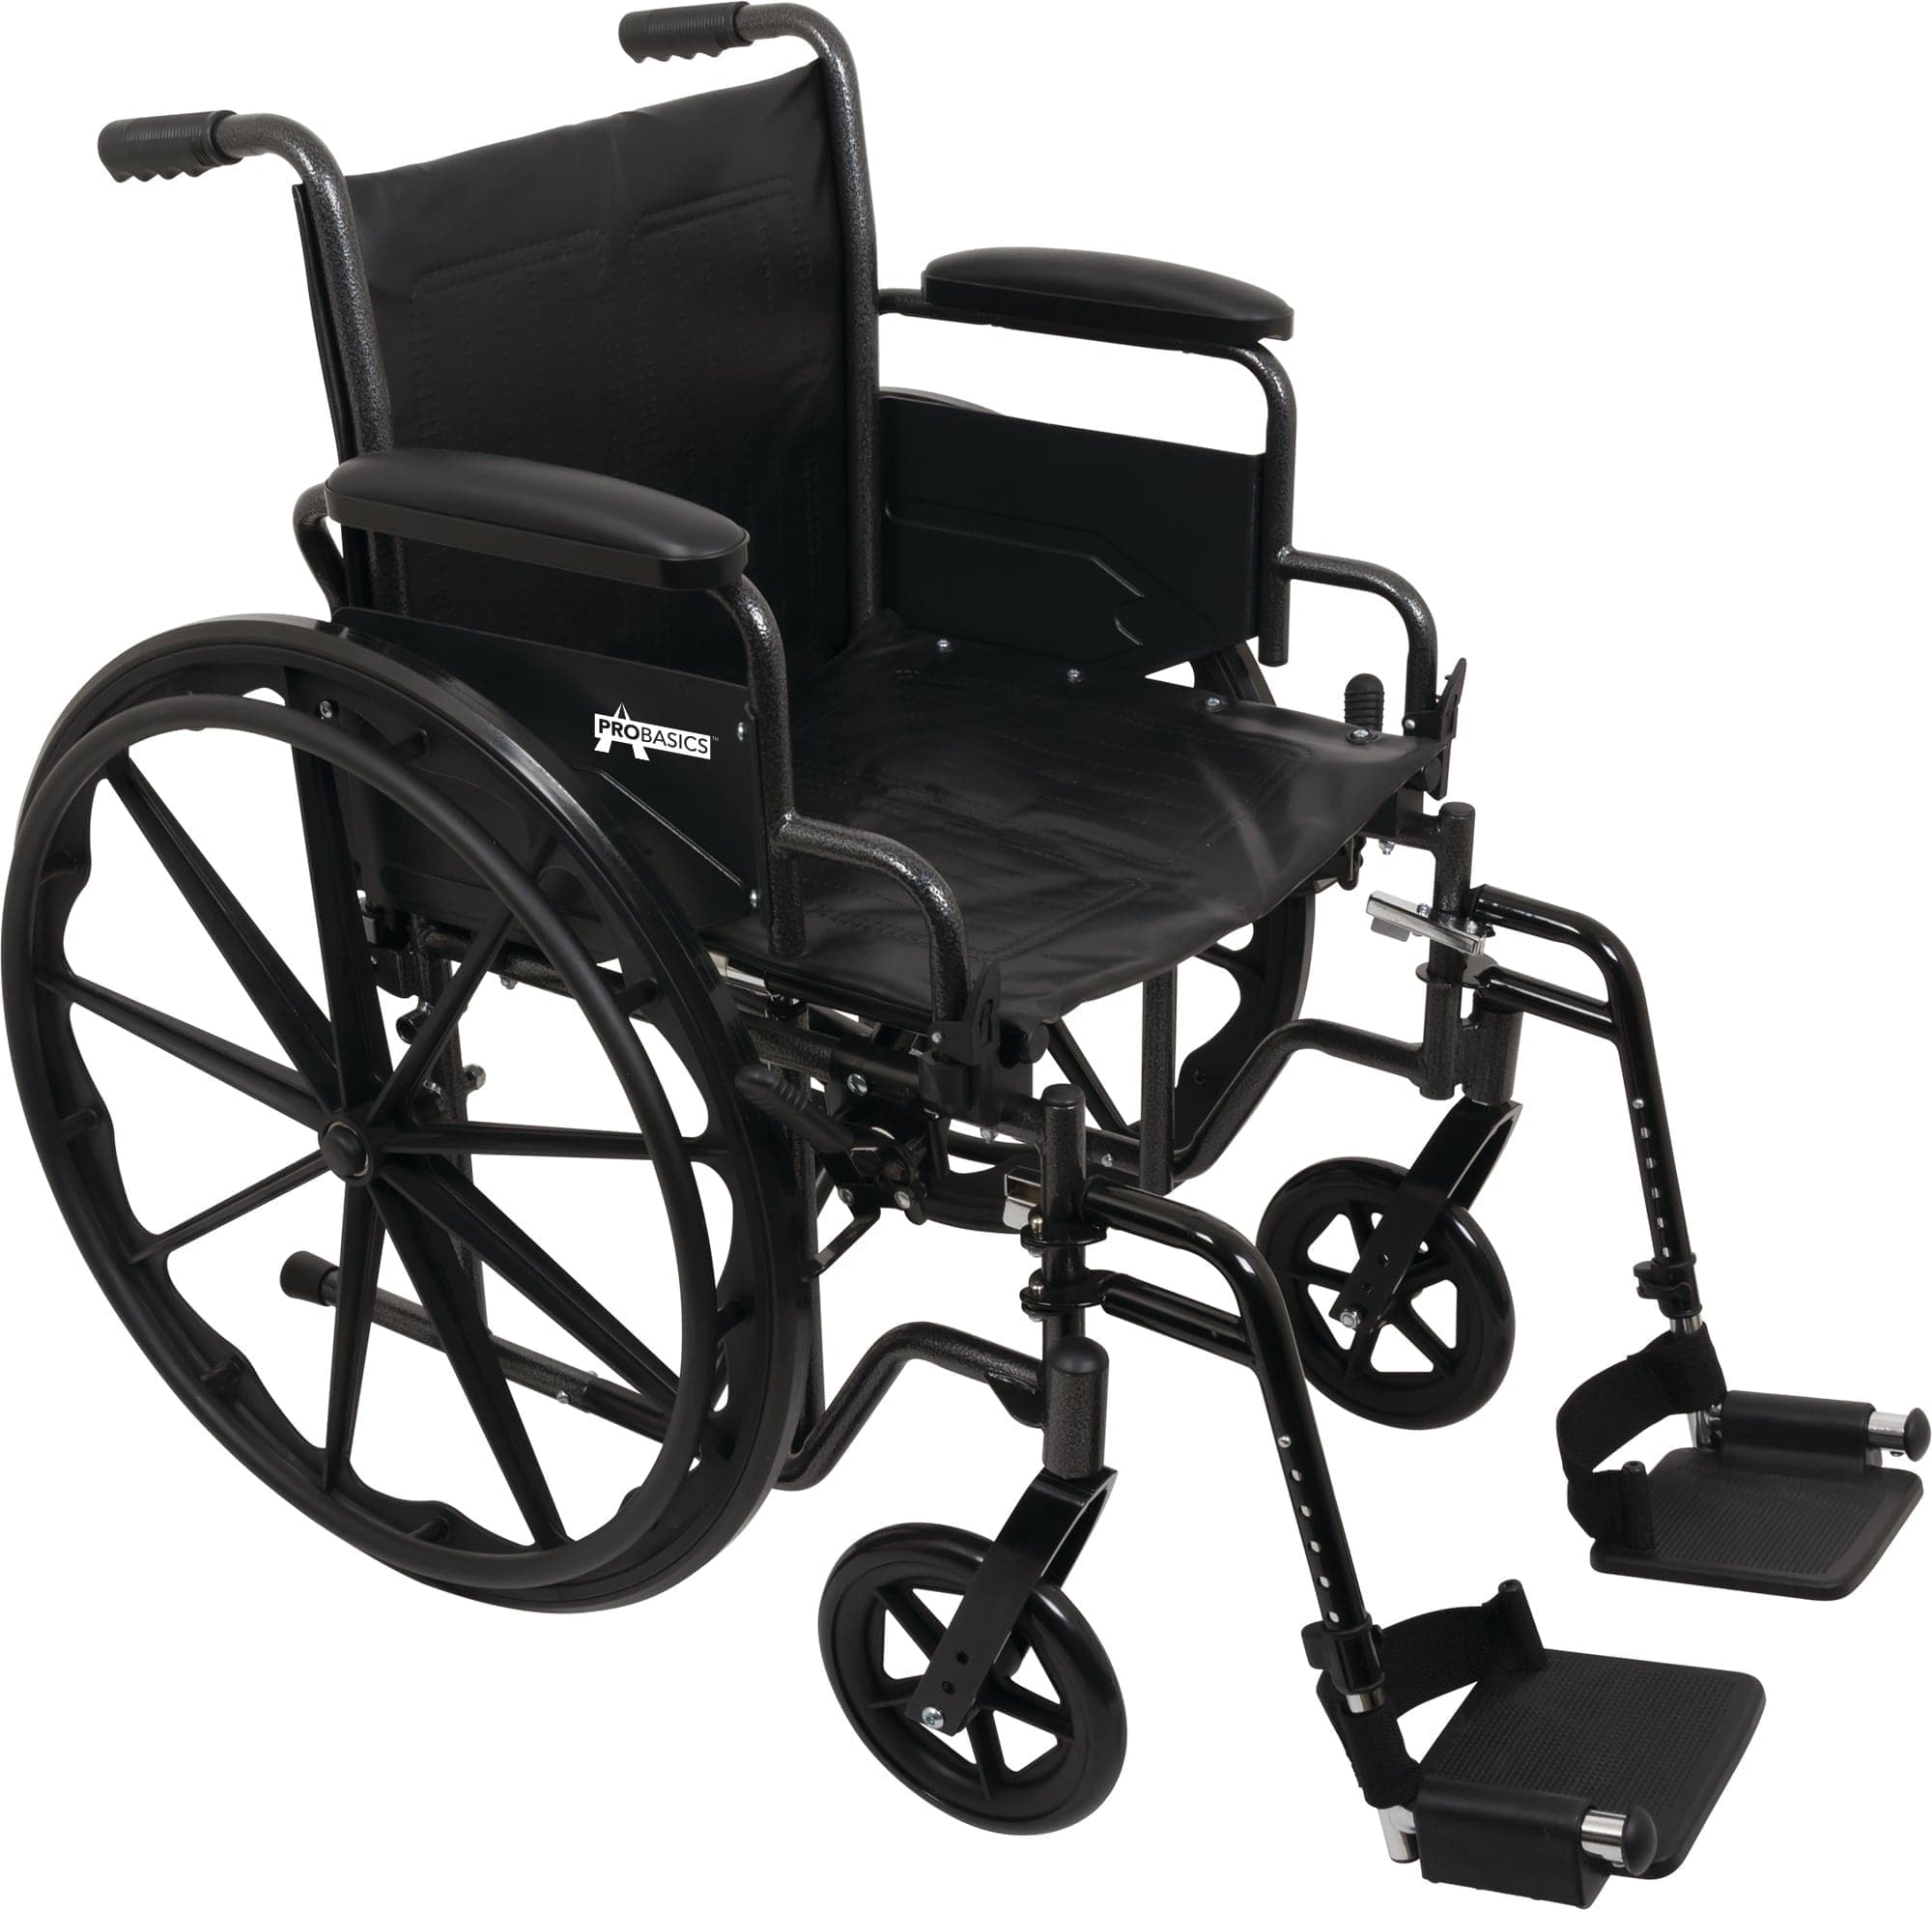 Compass Health Compass Health ProBasics K2 Wheelchair with 18" x 16" Seat and Swing-Away Footrests WC21816DS